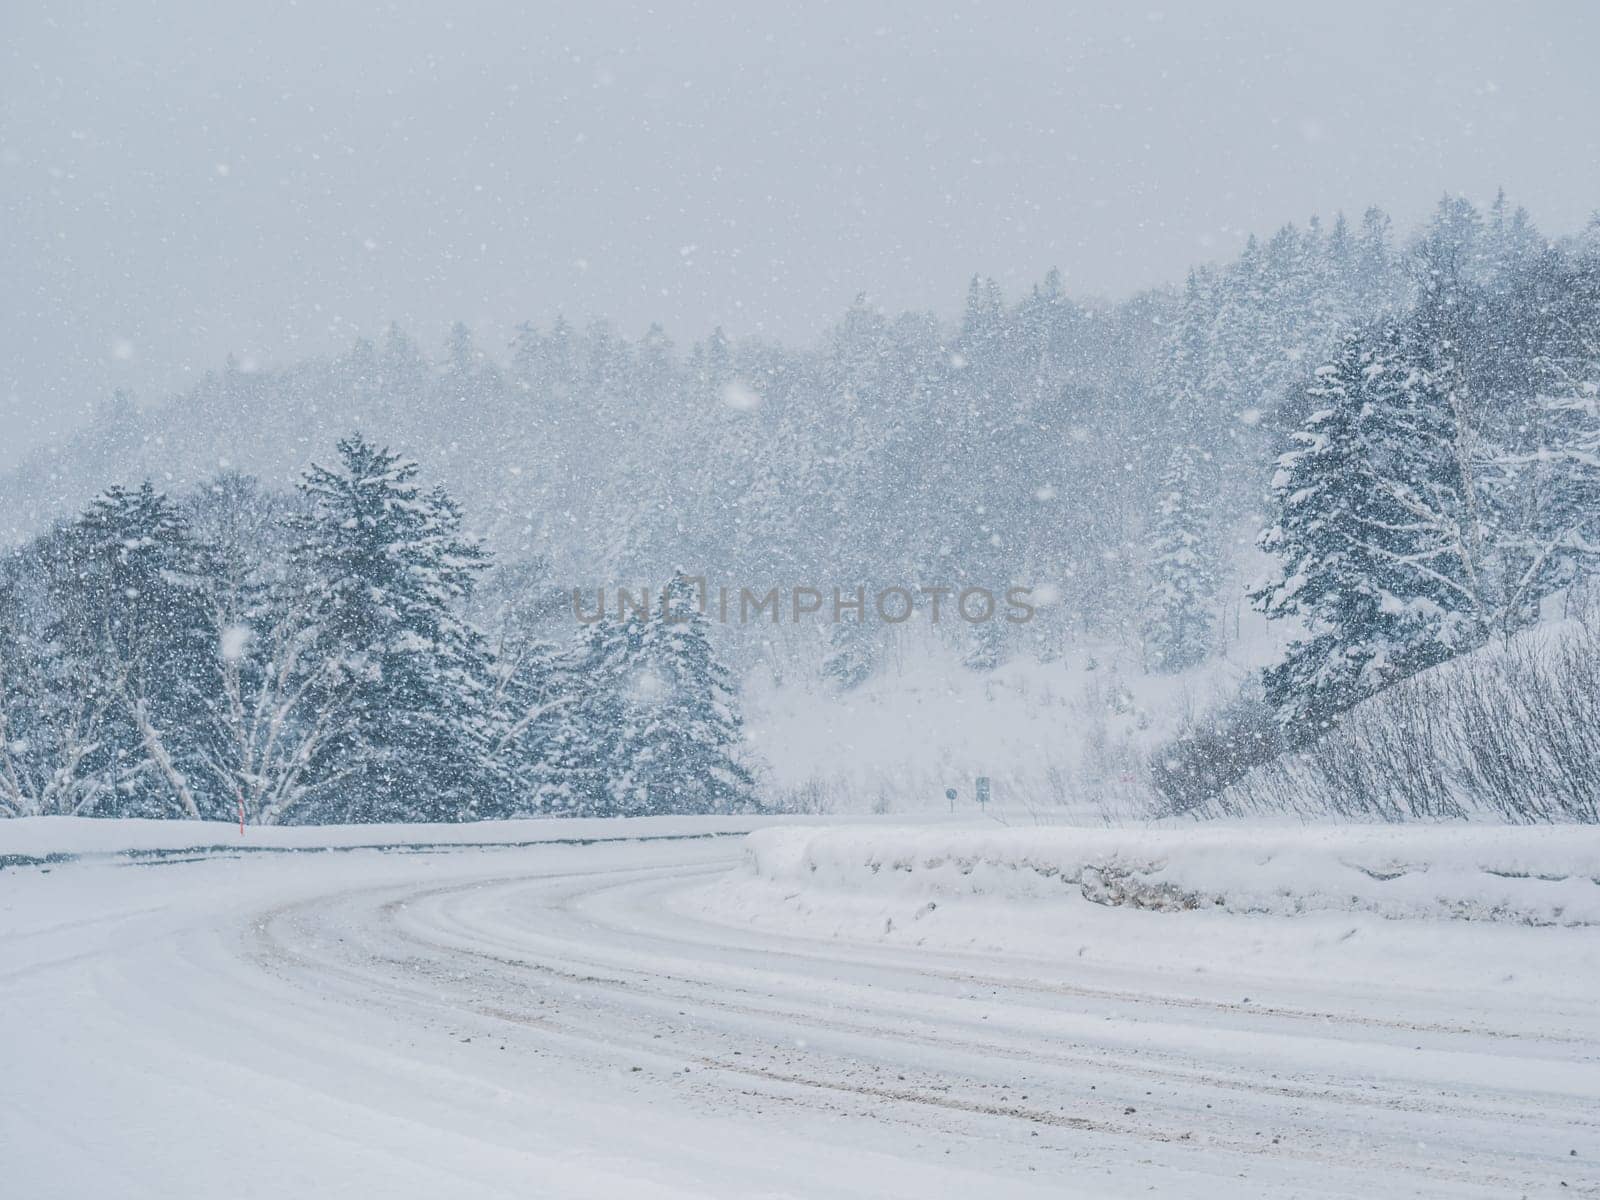 Snow is heavily falling on a winding mountain road lined with dense forest. The road appears slippery due to the accumulating snow.